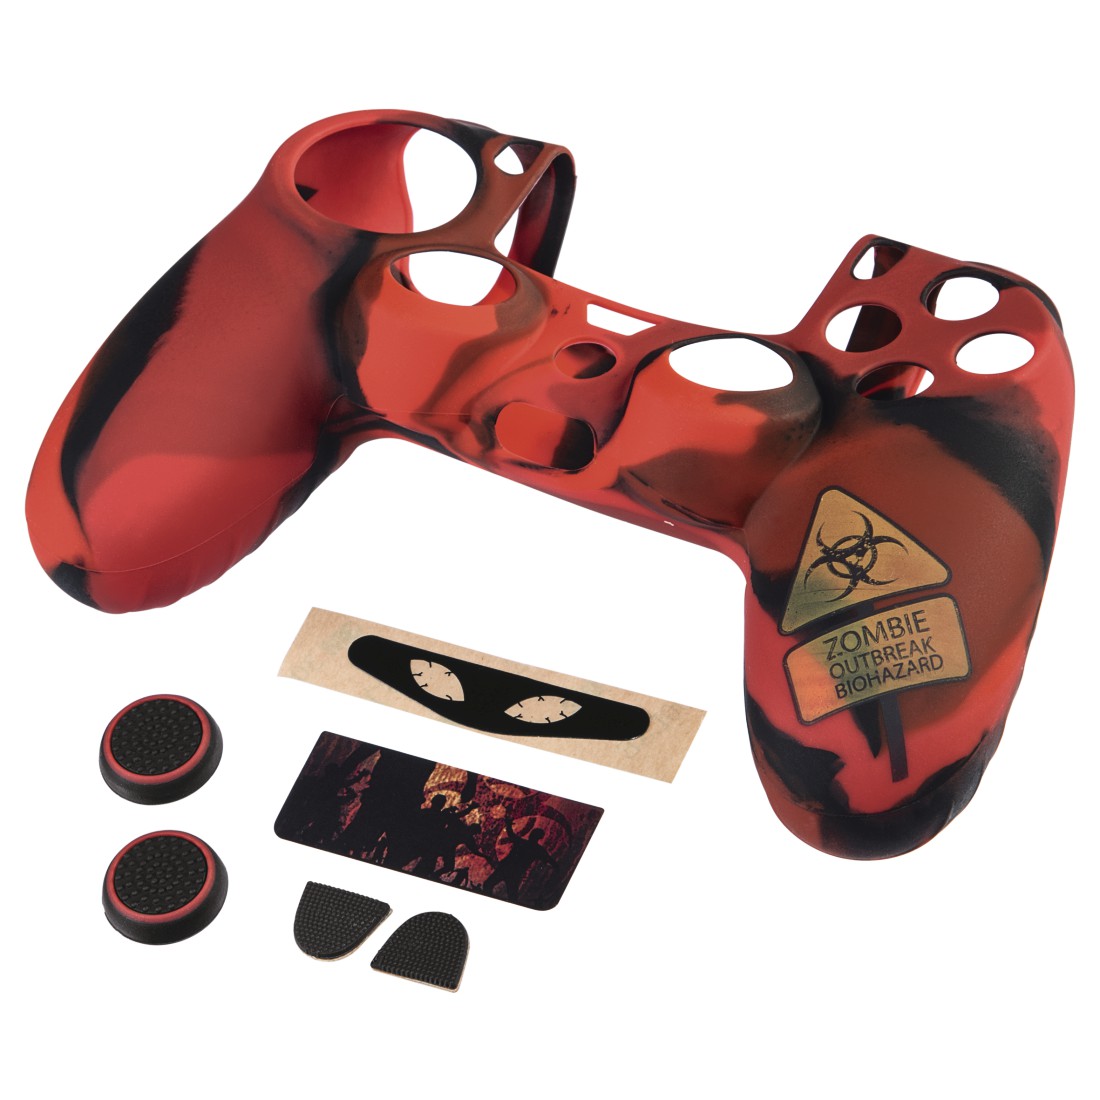 00054494 Hama 7-In-1 "Undead” Accessories Set for the Dualshock 4 Controller  PS4/Slim/Pro